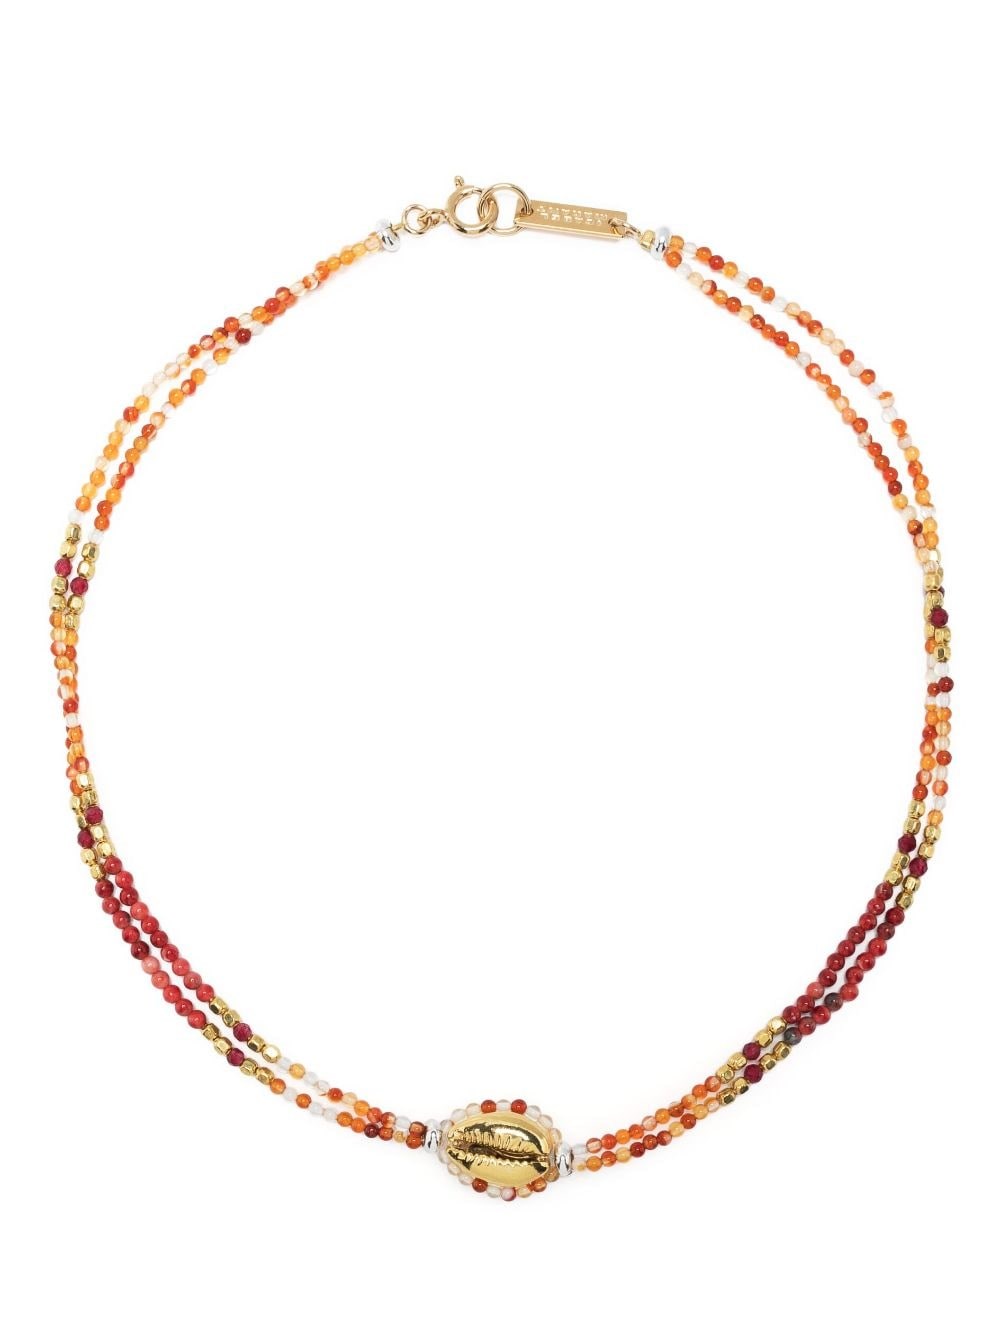 Isabel Marant Choker With Beads In Orange